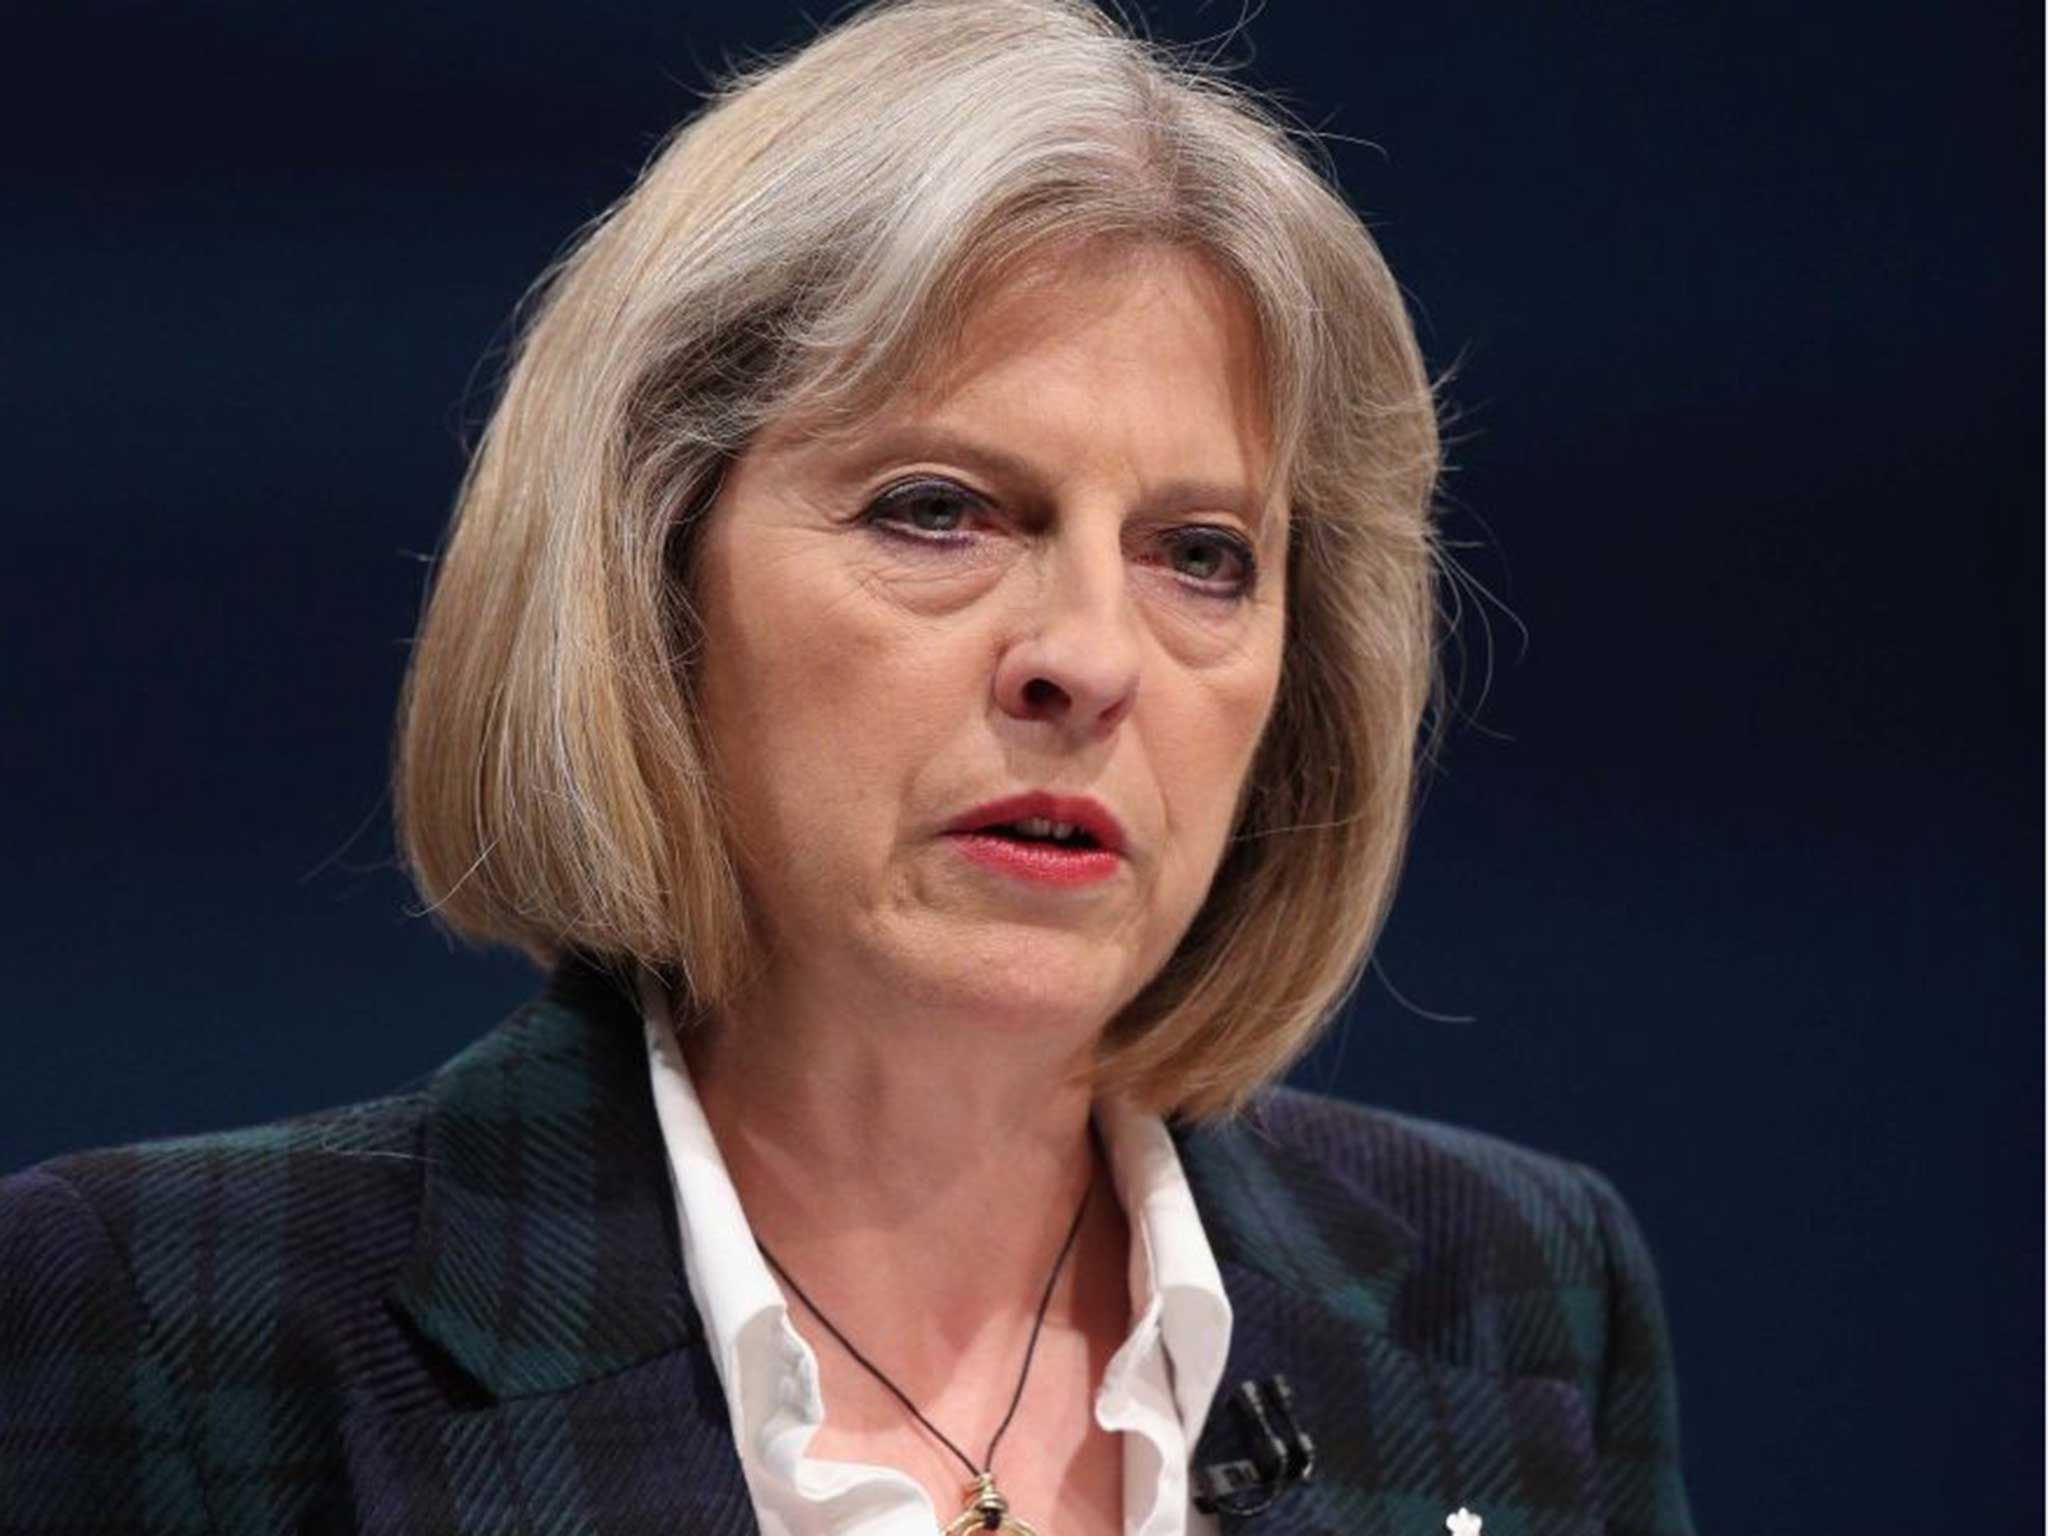 Theresa May has vowed to crack down on foreign criminals